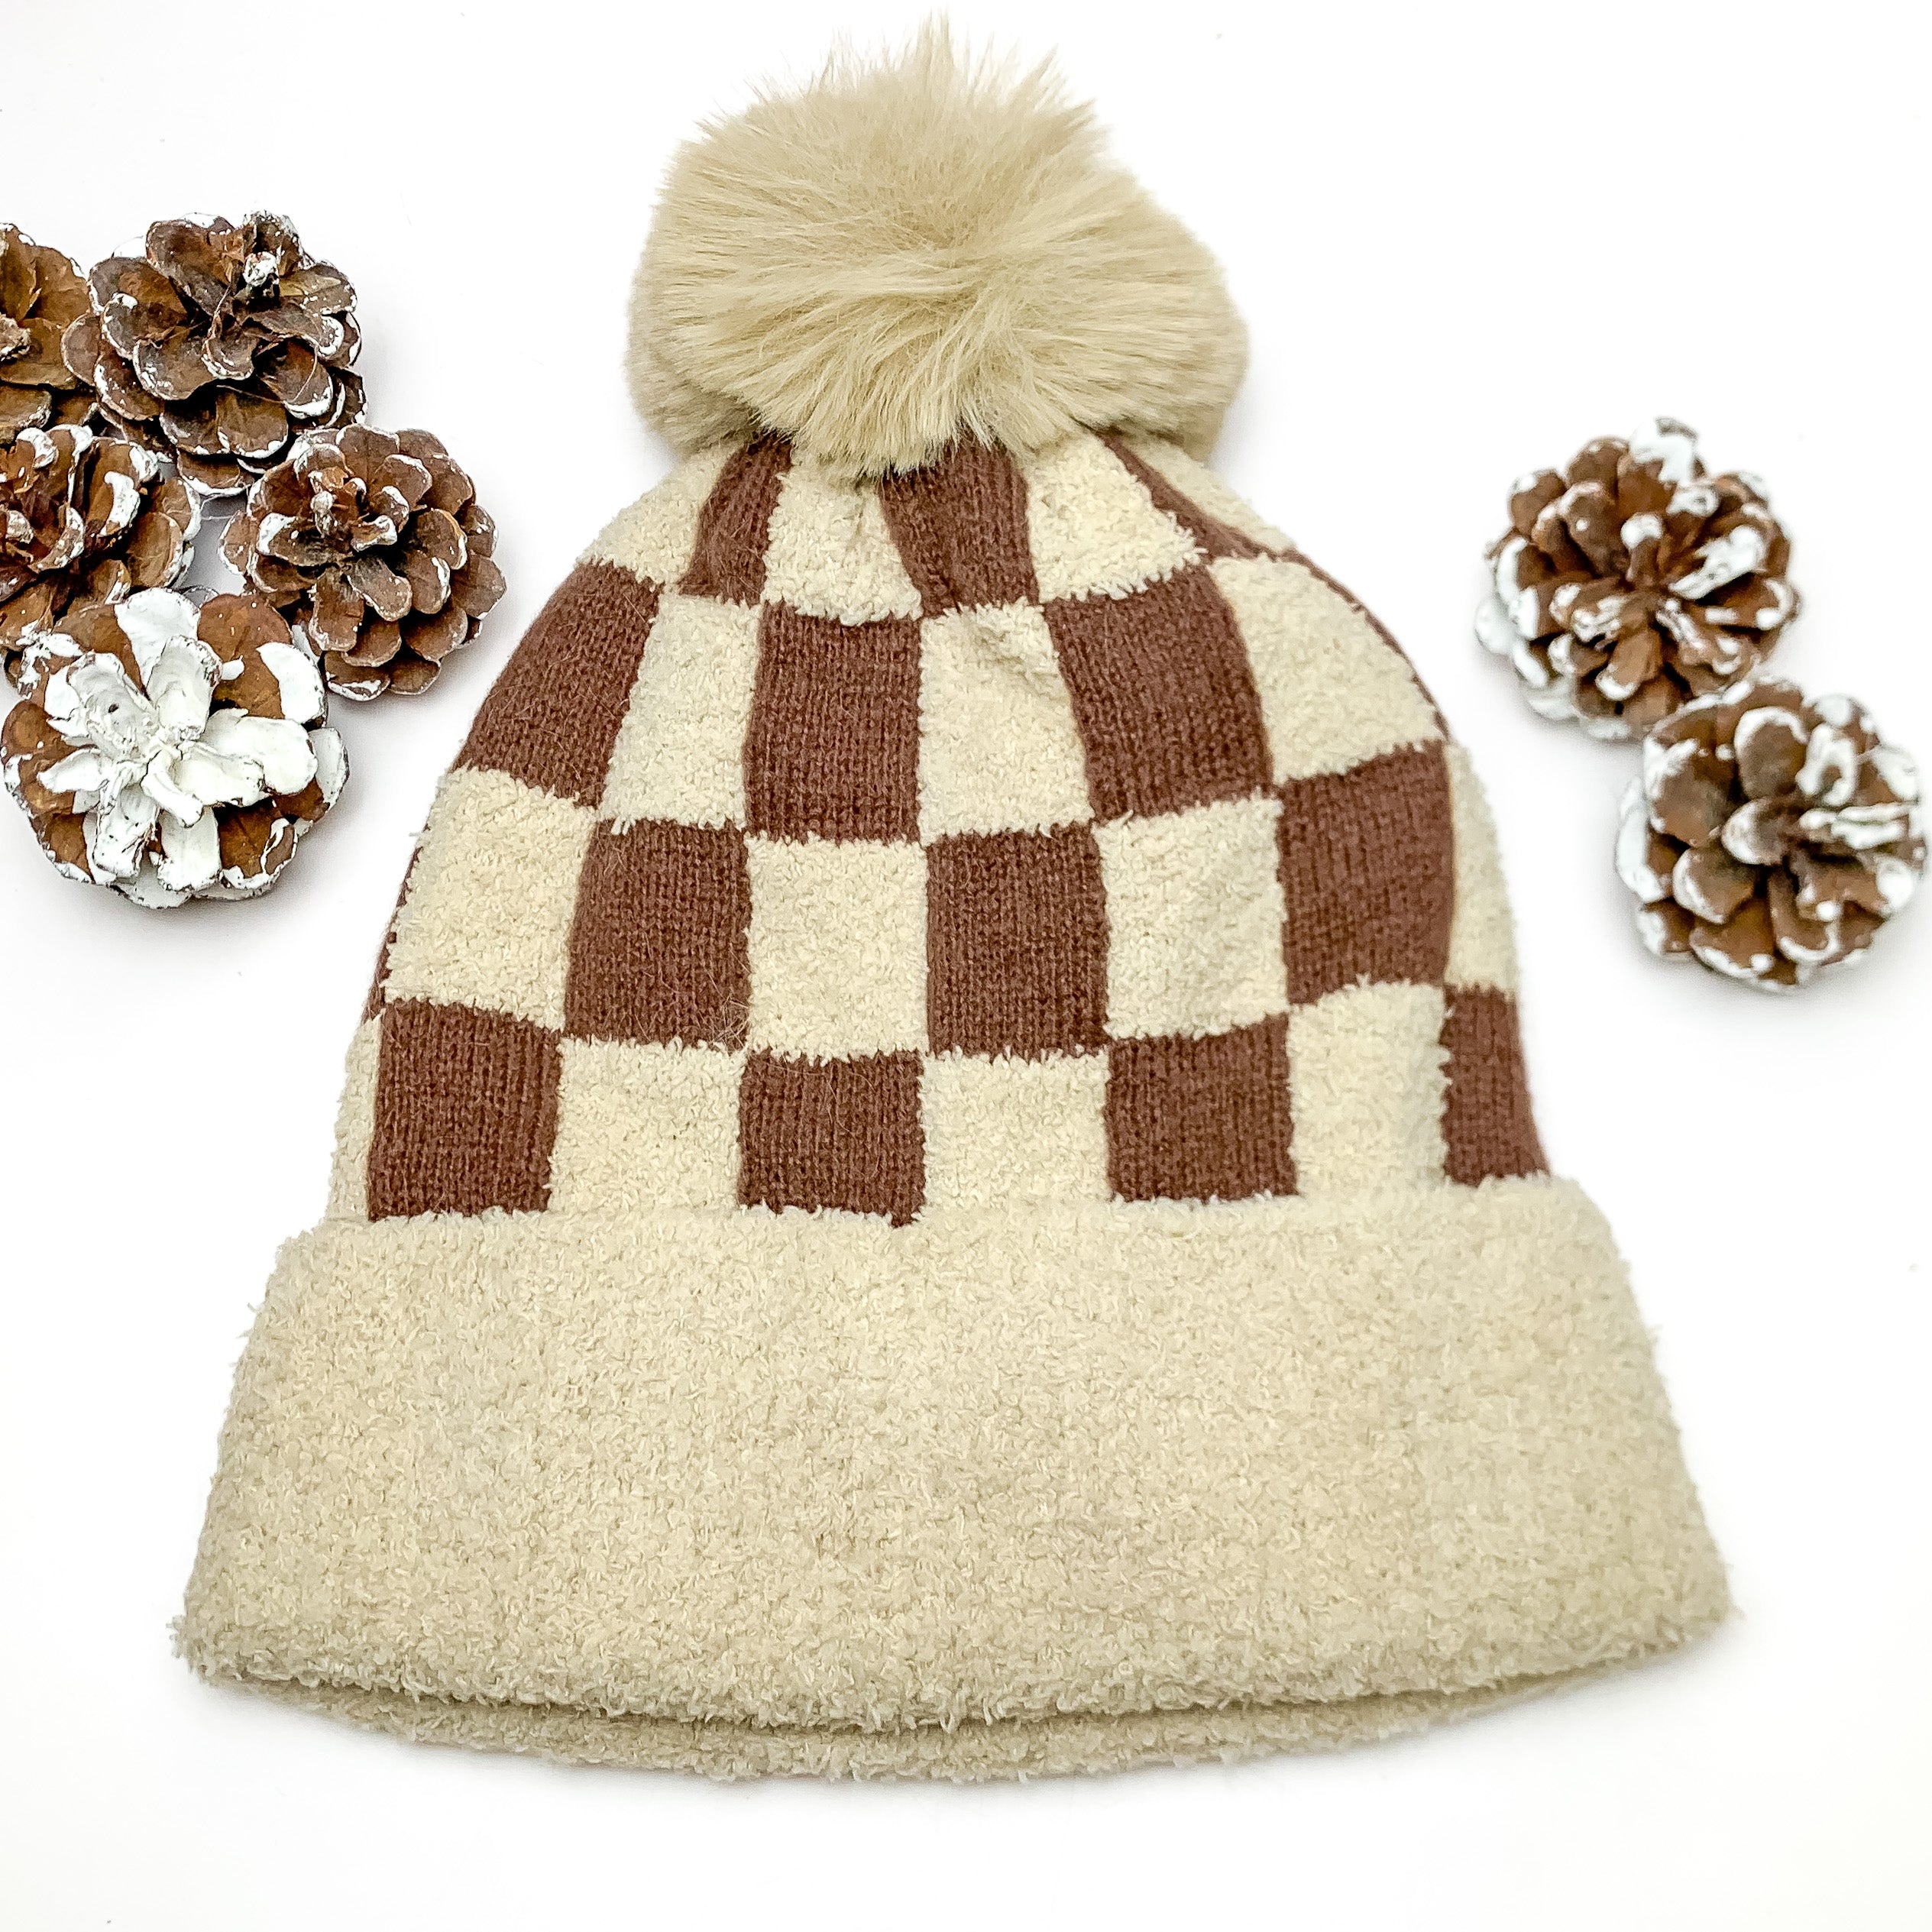 Checkered Beanie in Beige and Brown. This beanie is pictured on a white background with pinecones around it. 